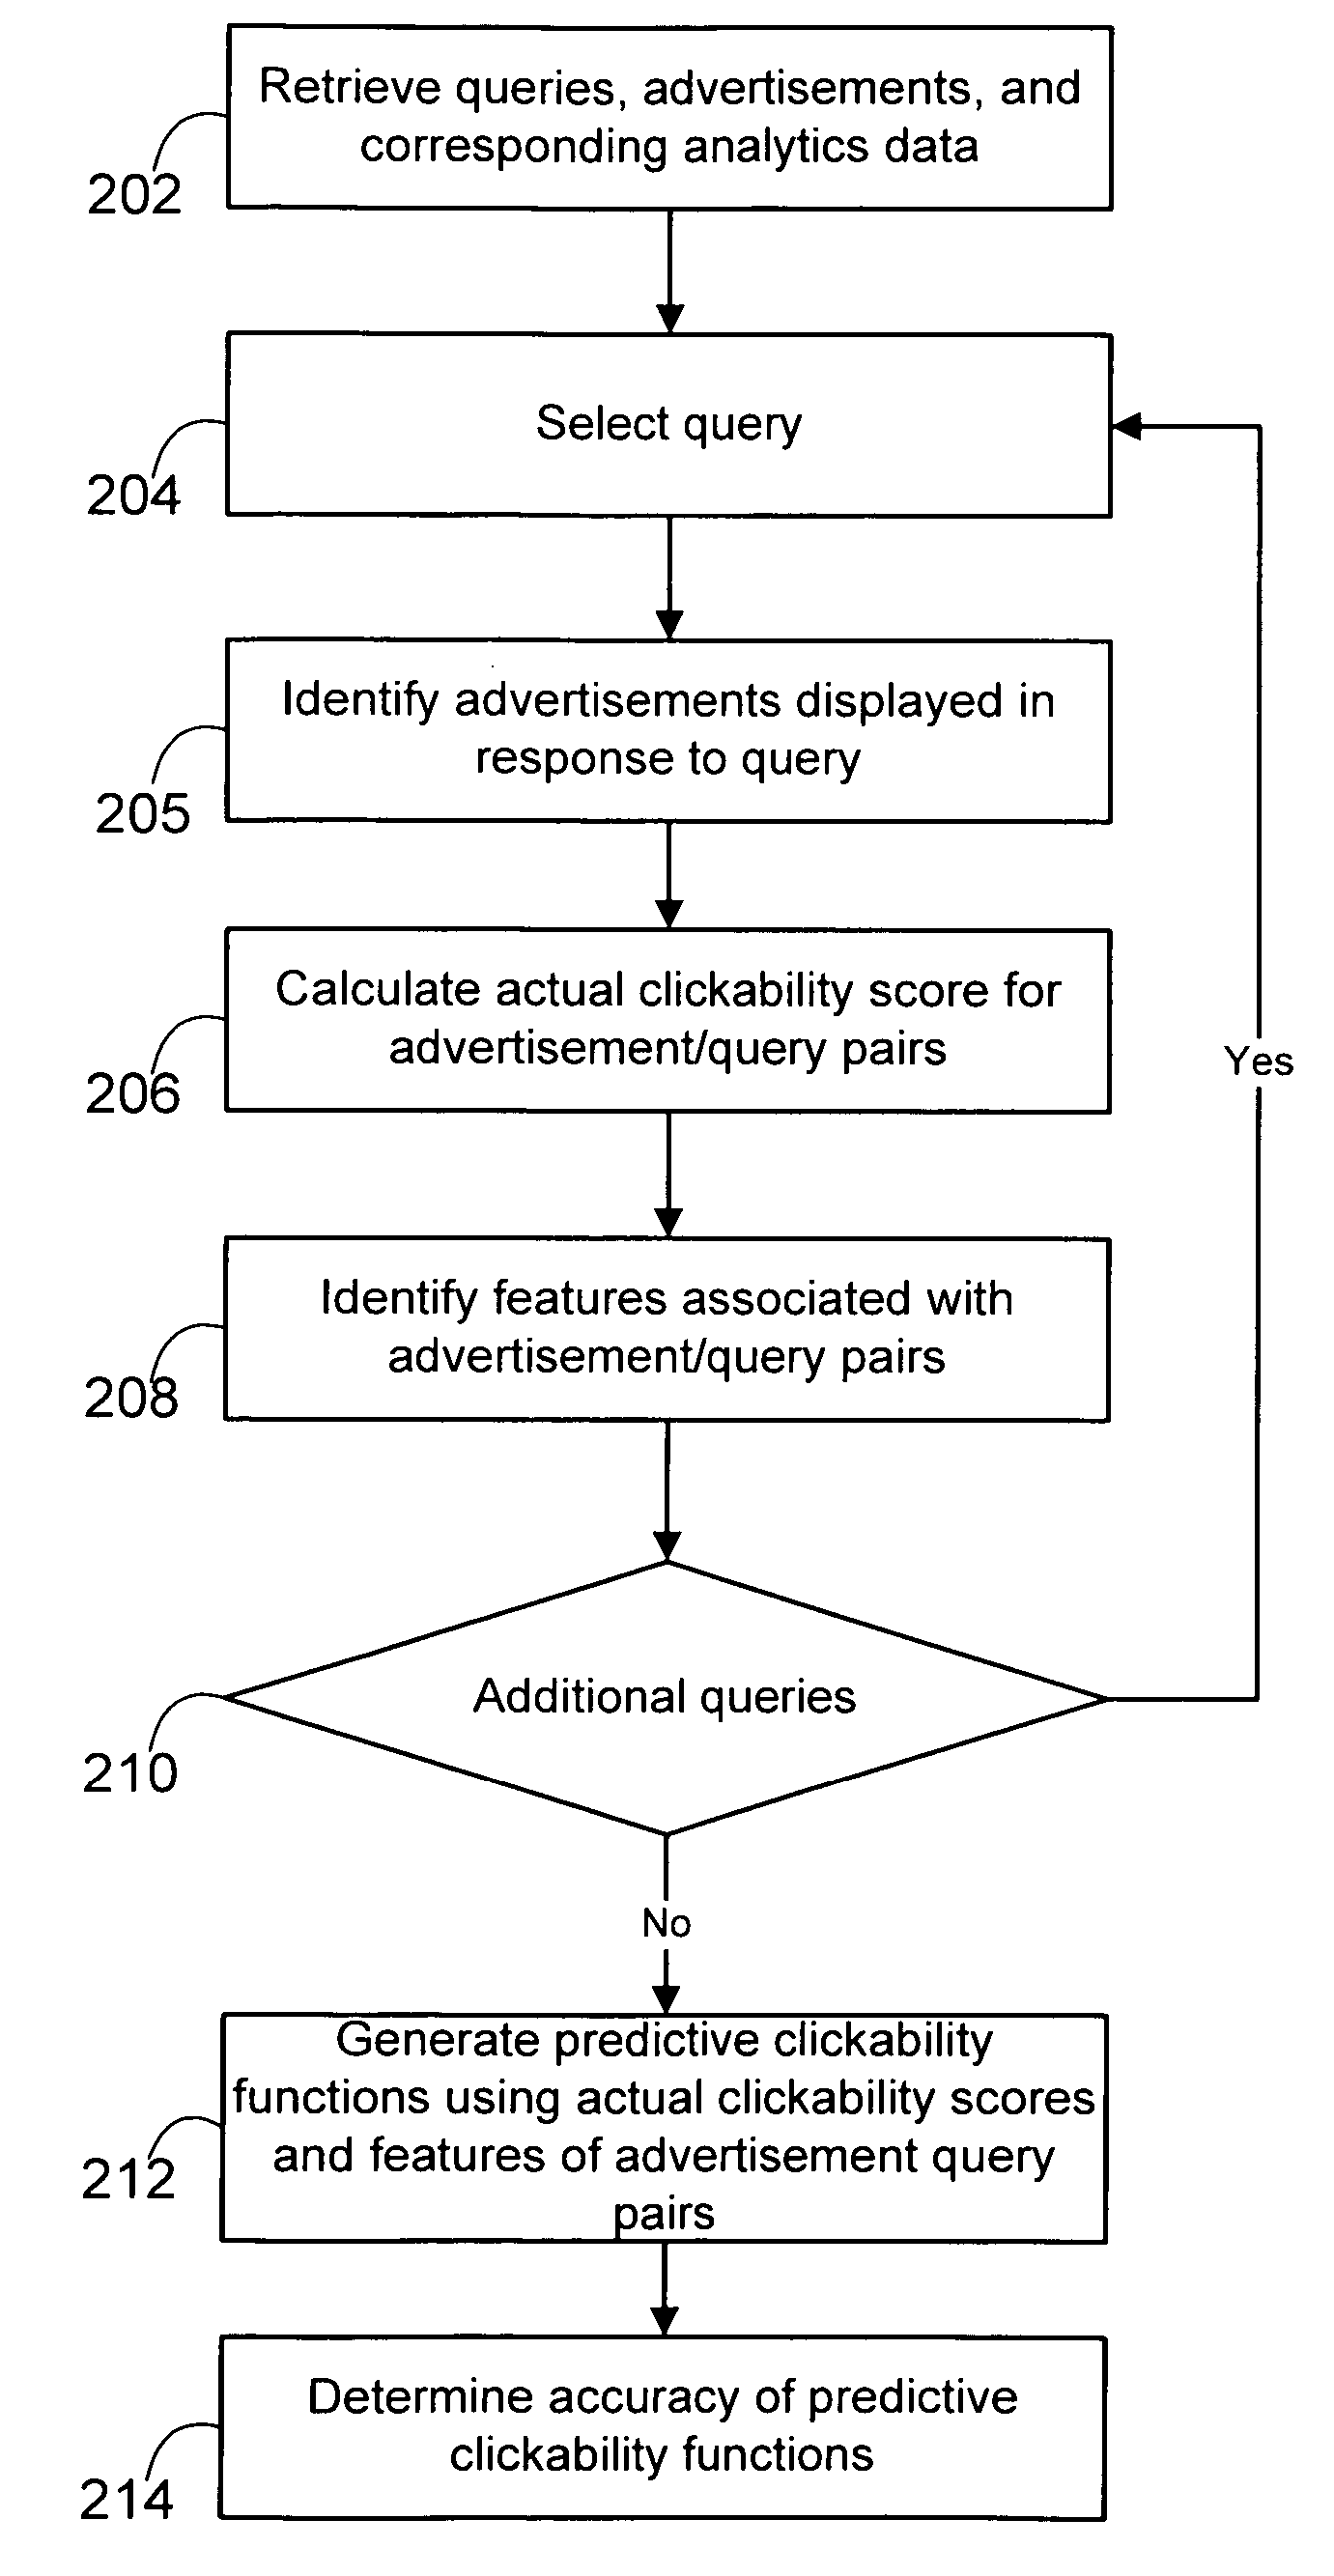 System and method for generating functions to predict the clickability of advertisements